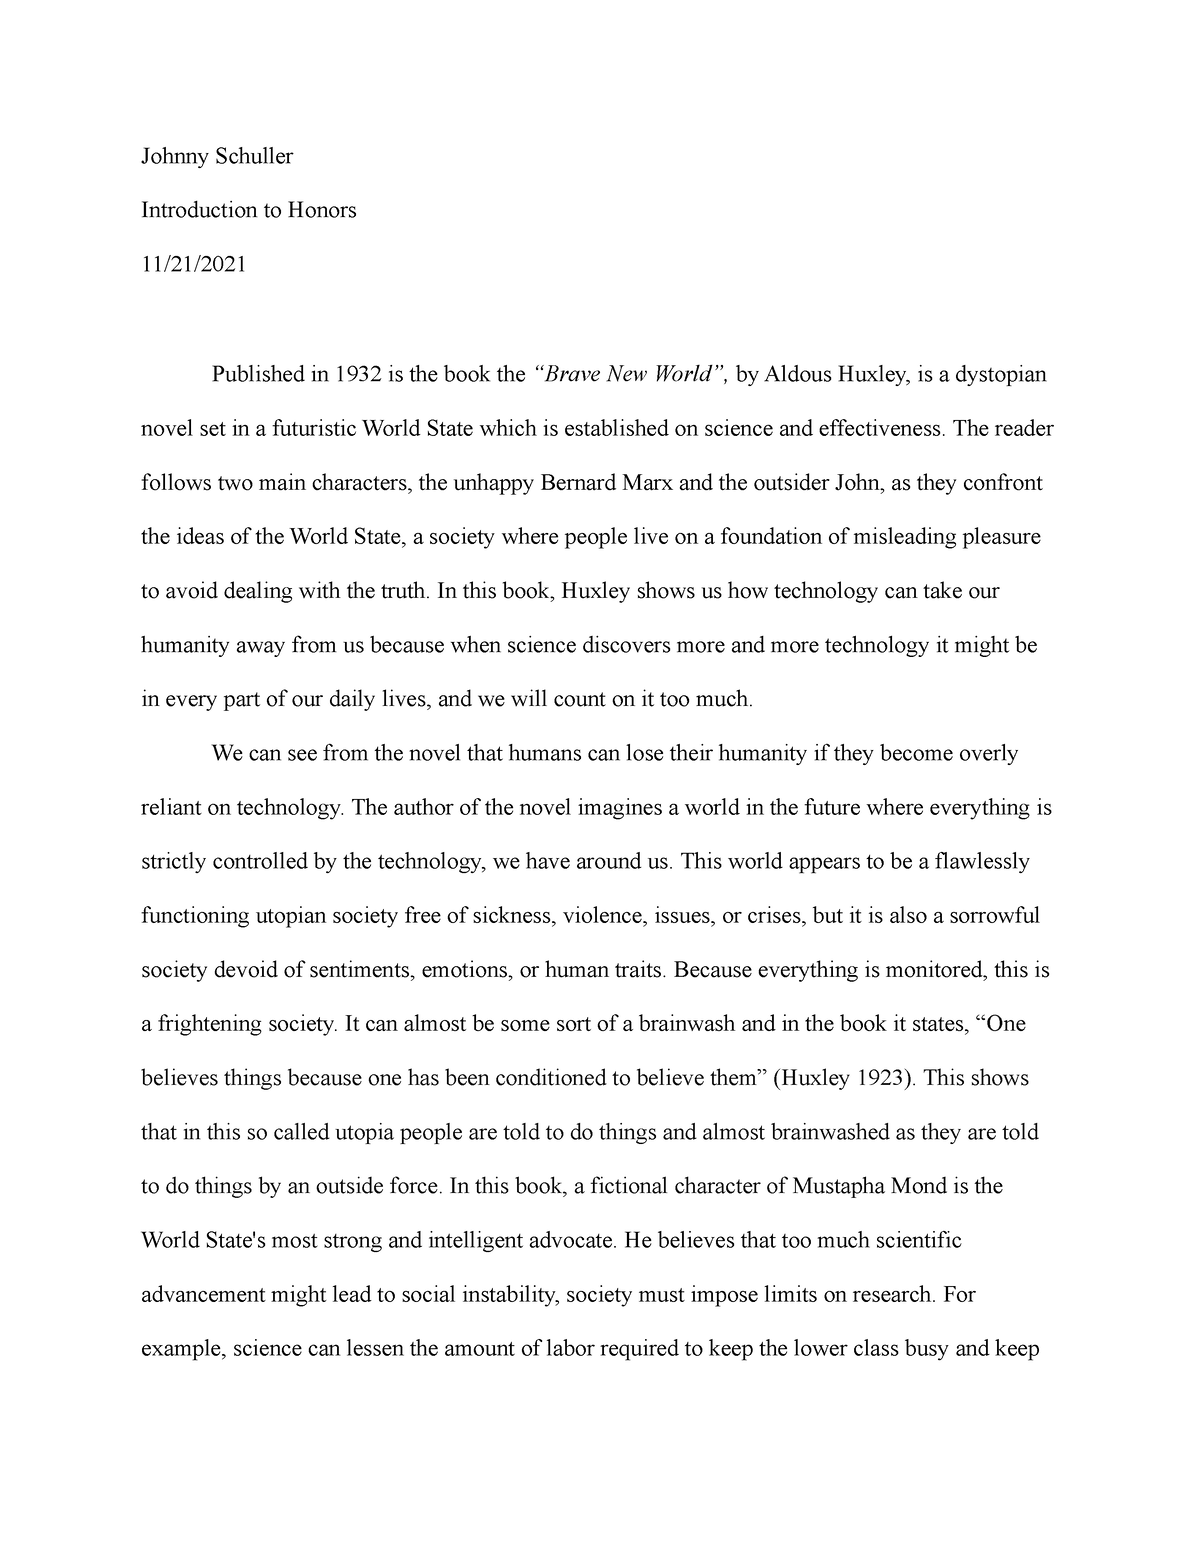 honors college admission essay